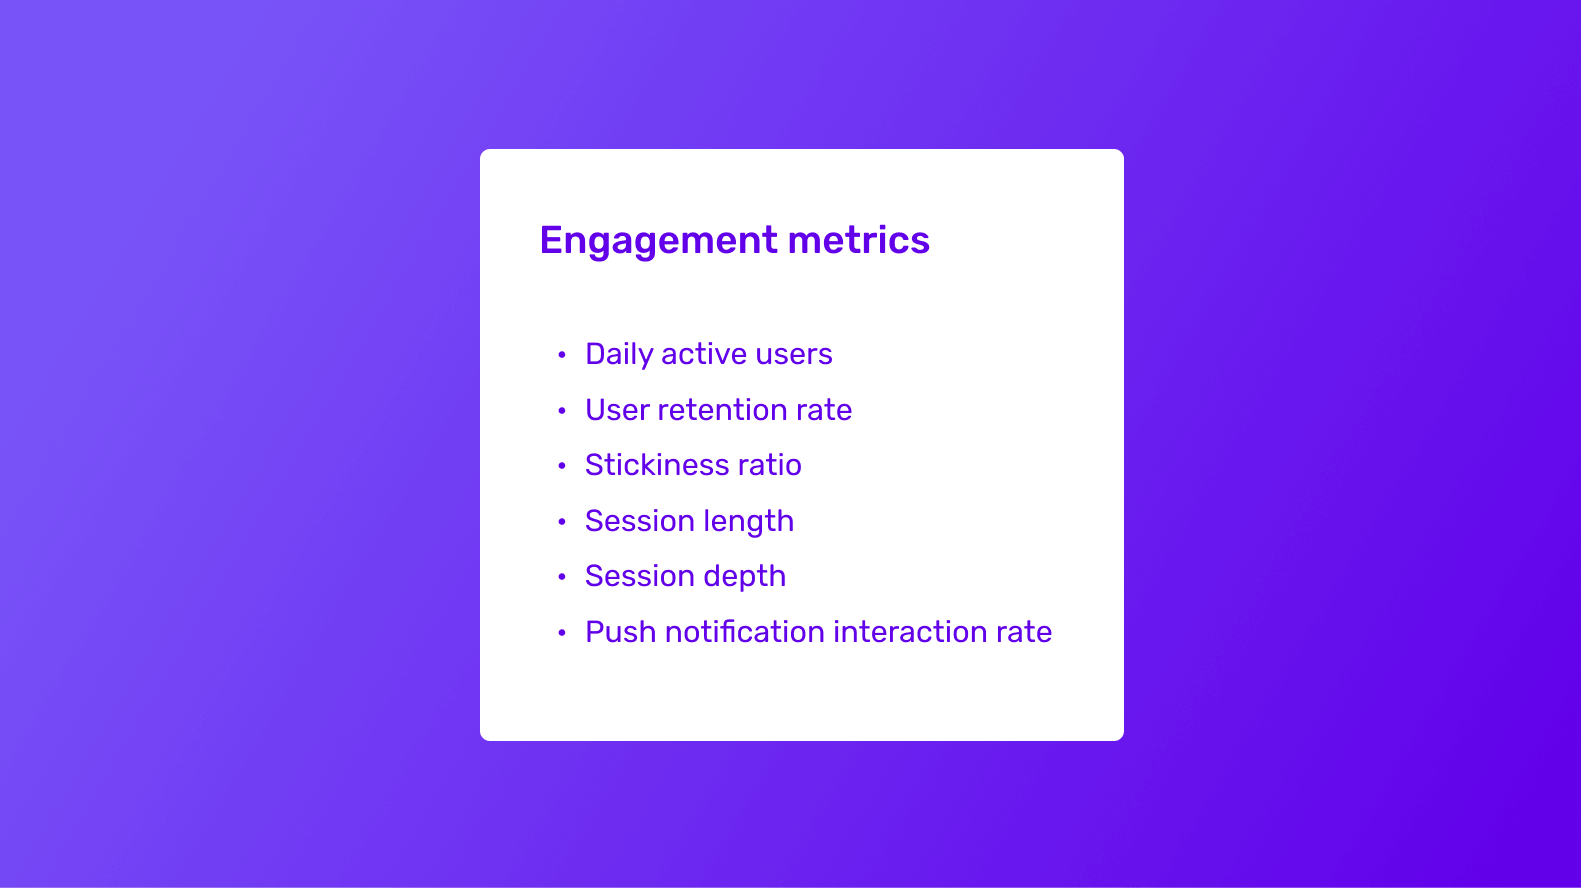 Mobile app engagement metrics including daily active users, user retention rate, stickiness ratio, session length, session depth, push notification interaction rate